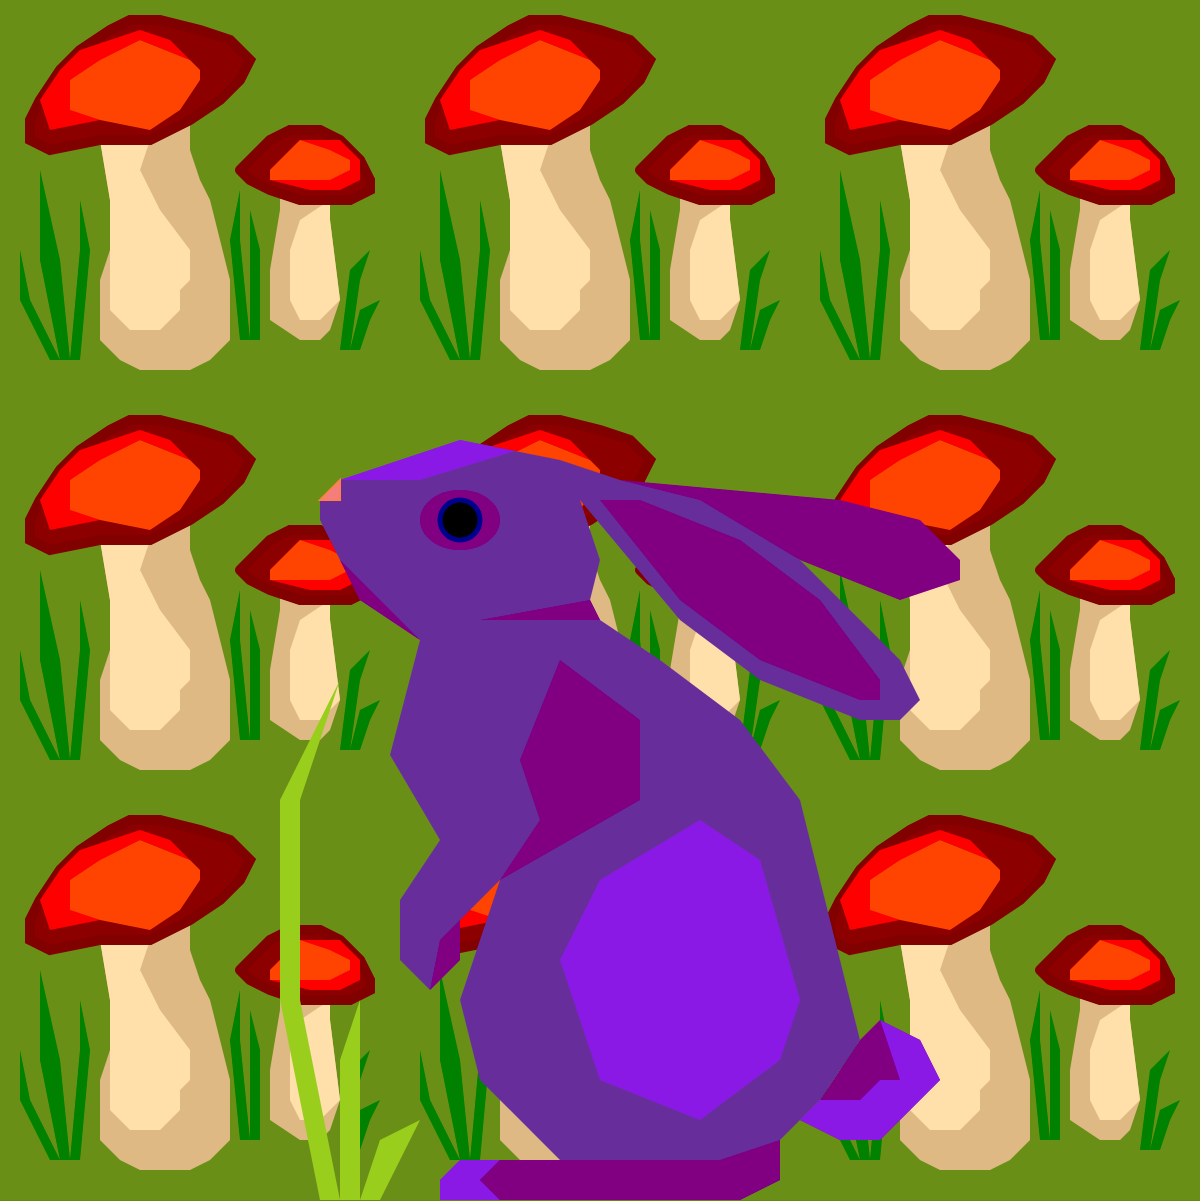 A purple rabbit standing in front of a field of red mushrooms.